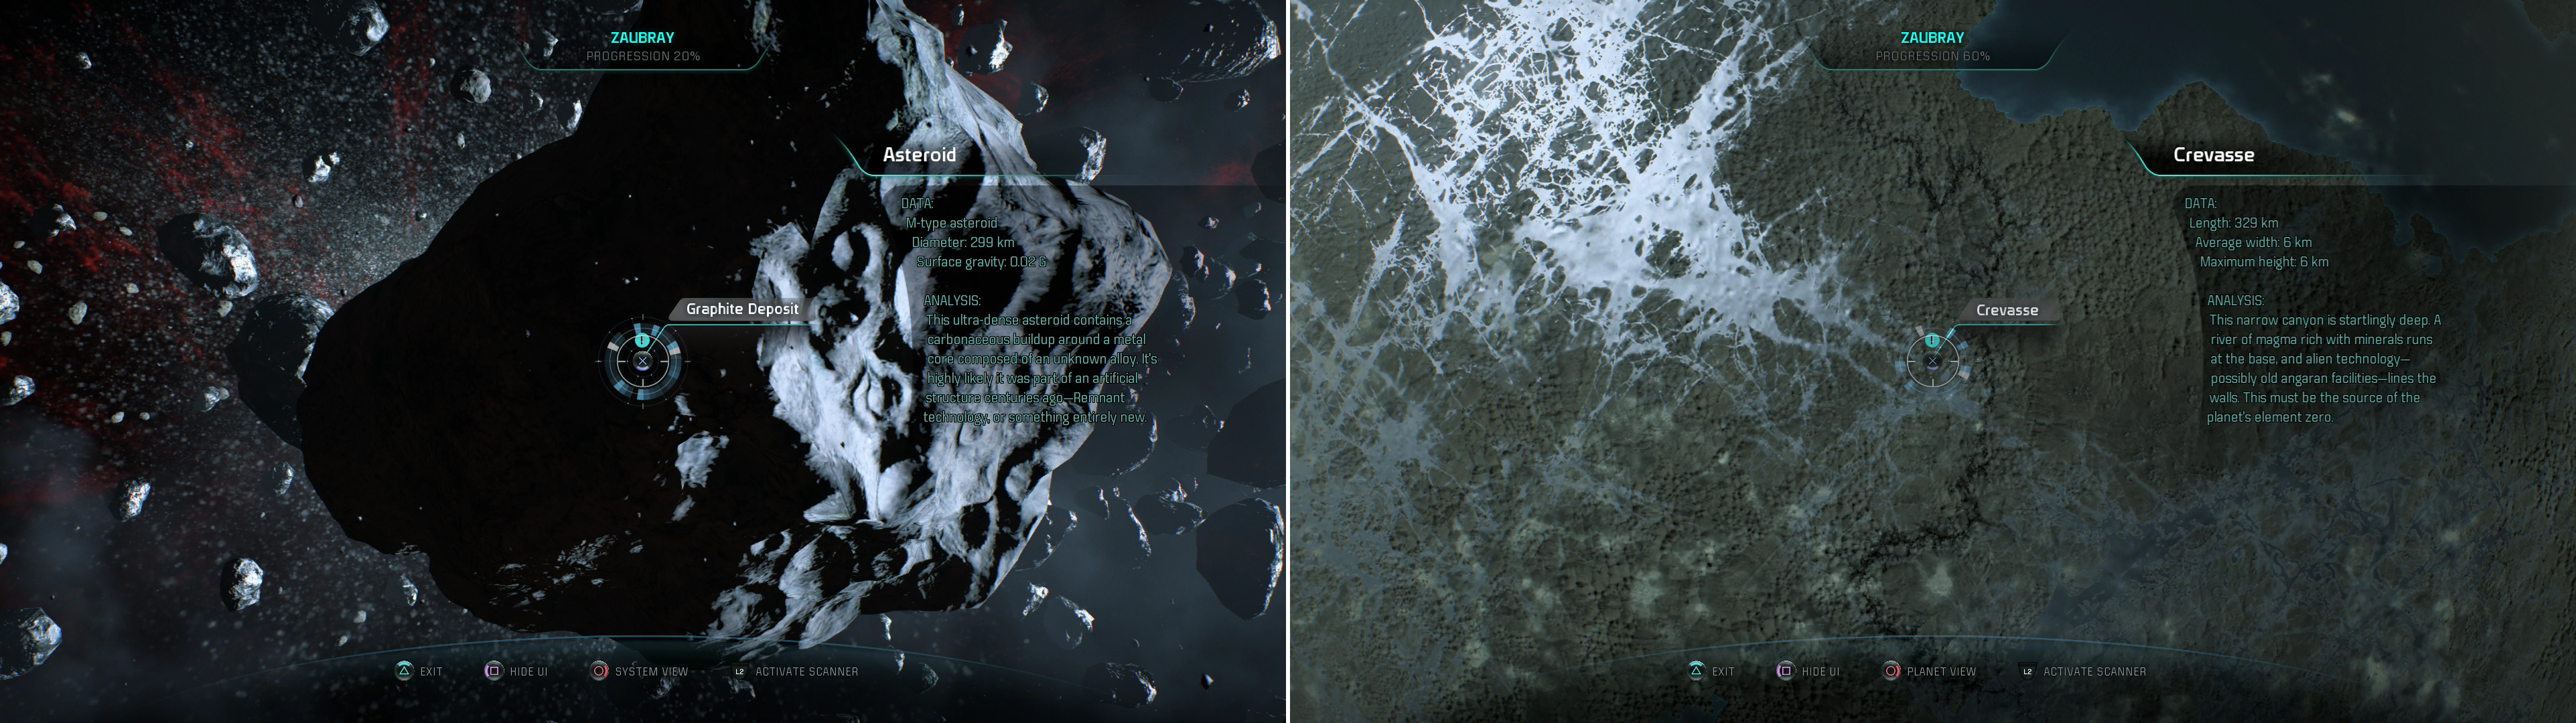 Scan an Asteroid to find a Graphite Deposit (left), then scan the unusual crevasse on Dubraaci to earn some XP (right).